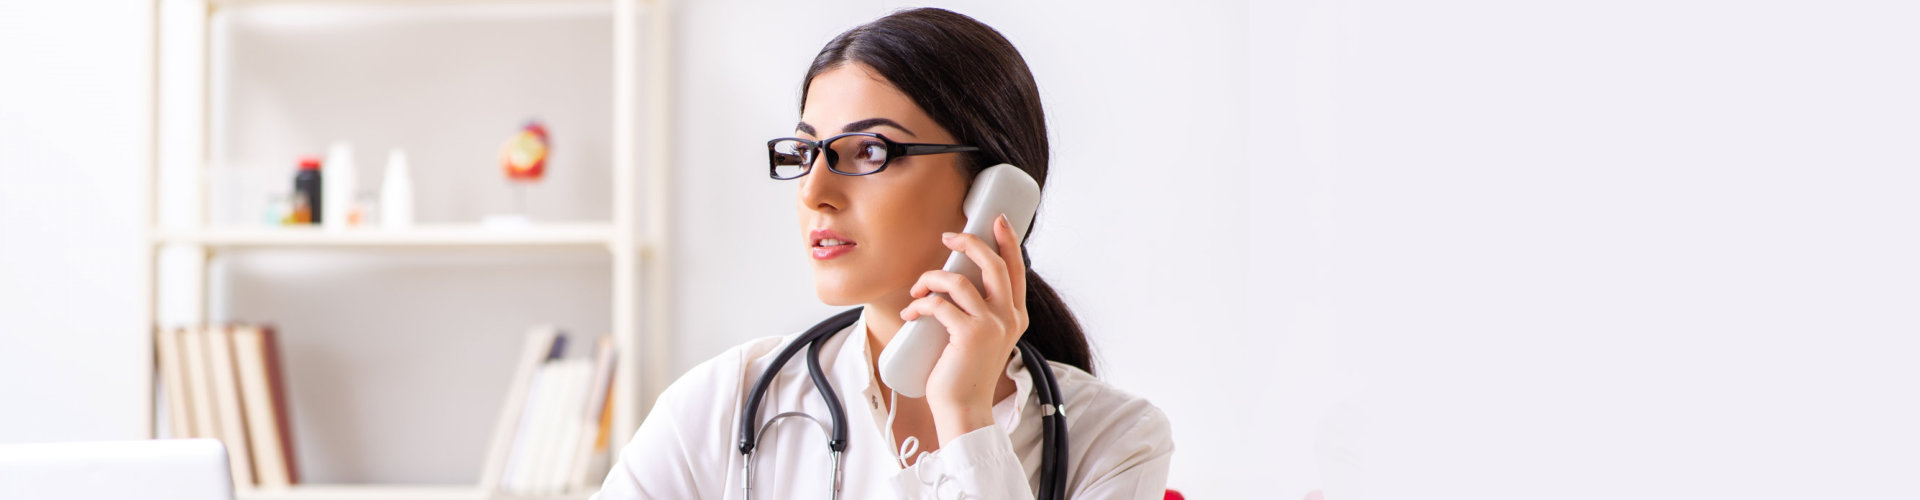 woman calling to her patient